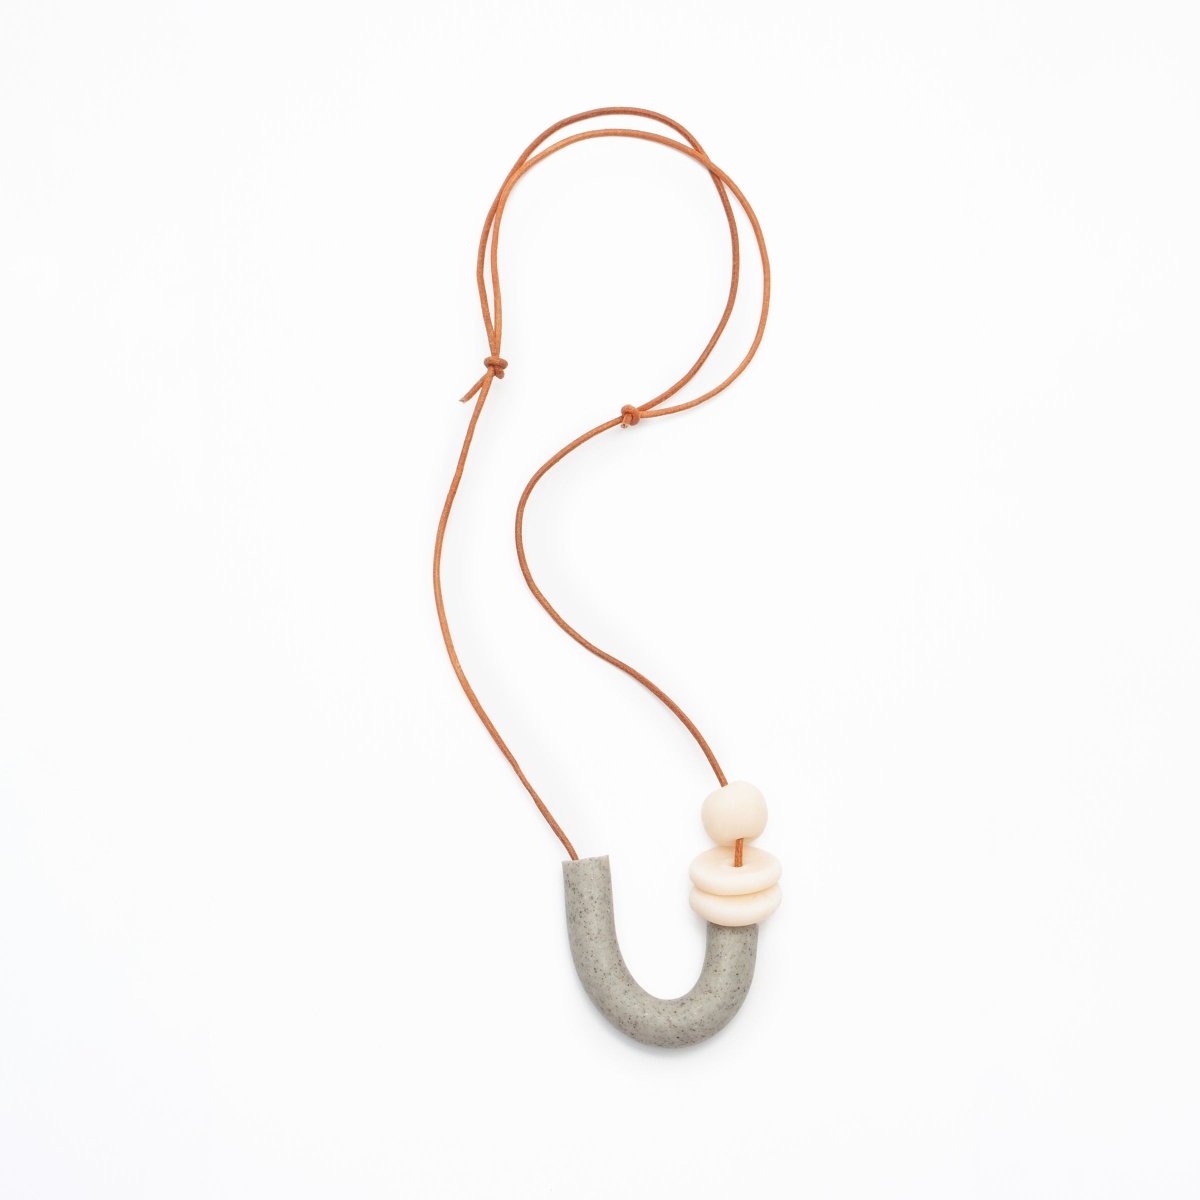 U shaped necklace made of polymer clay and orange leather cord. Made in Los Angeles, California by Hey Moon Designs. 